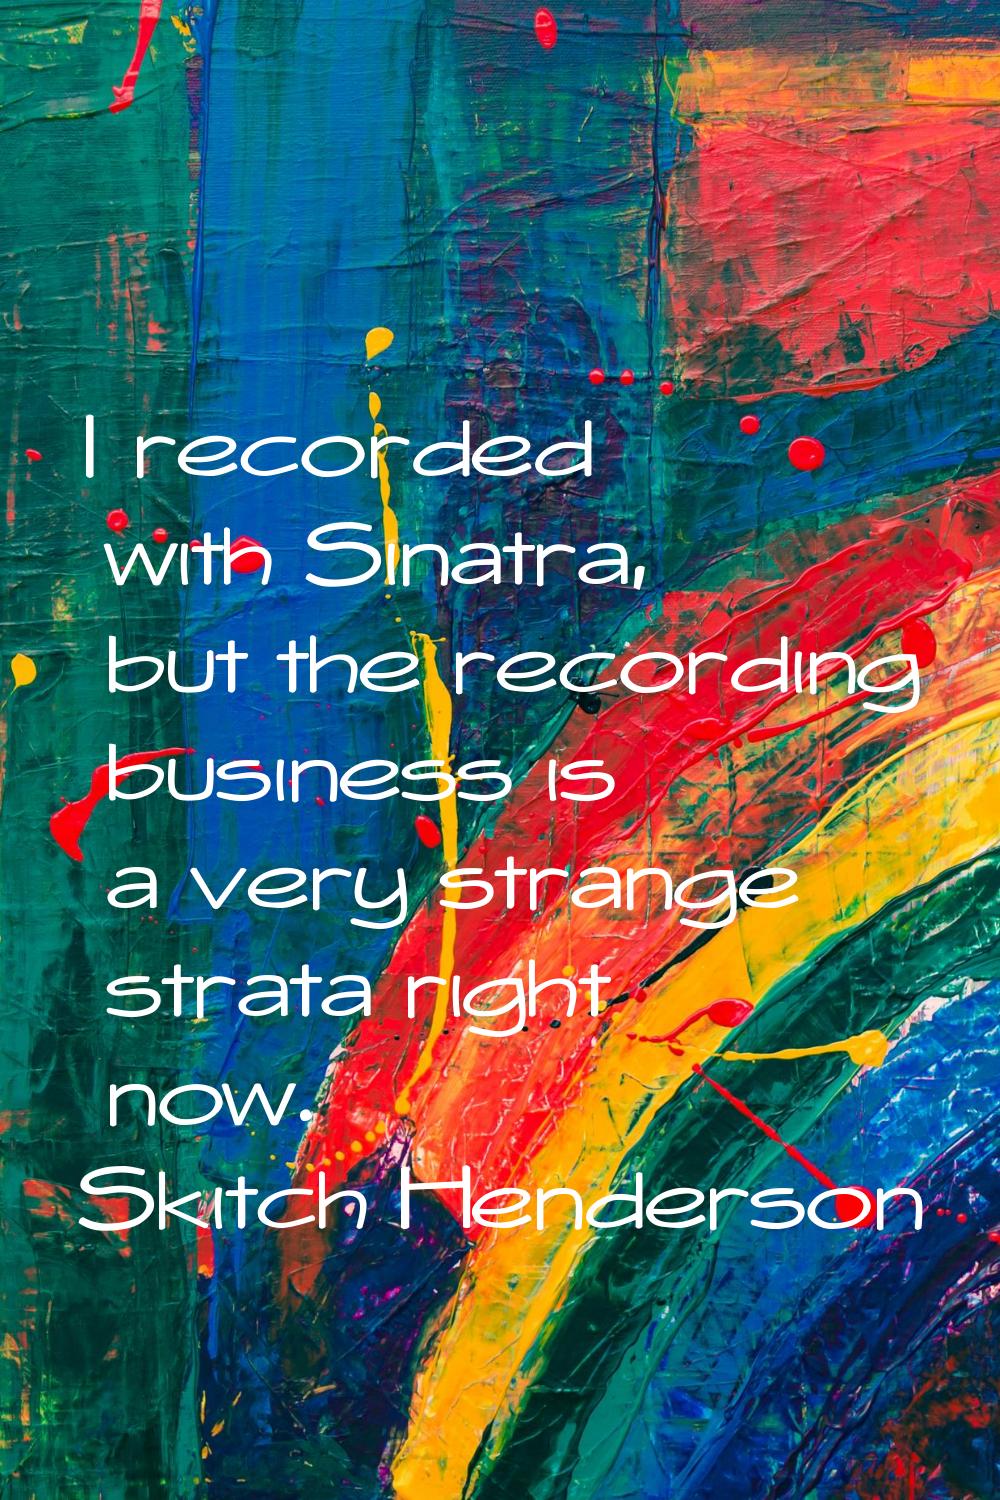 I recorded with Sinatra, but the recording business is a very strange strata right now.